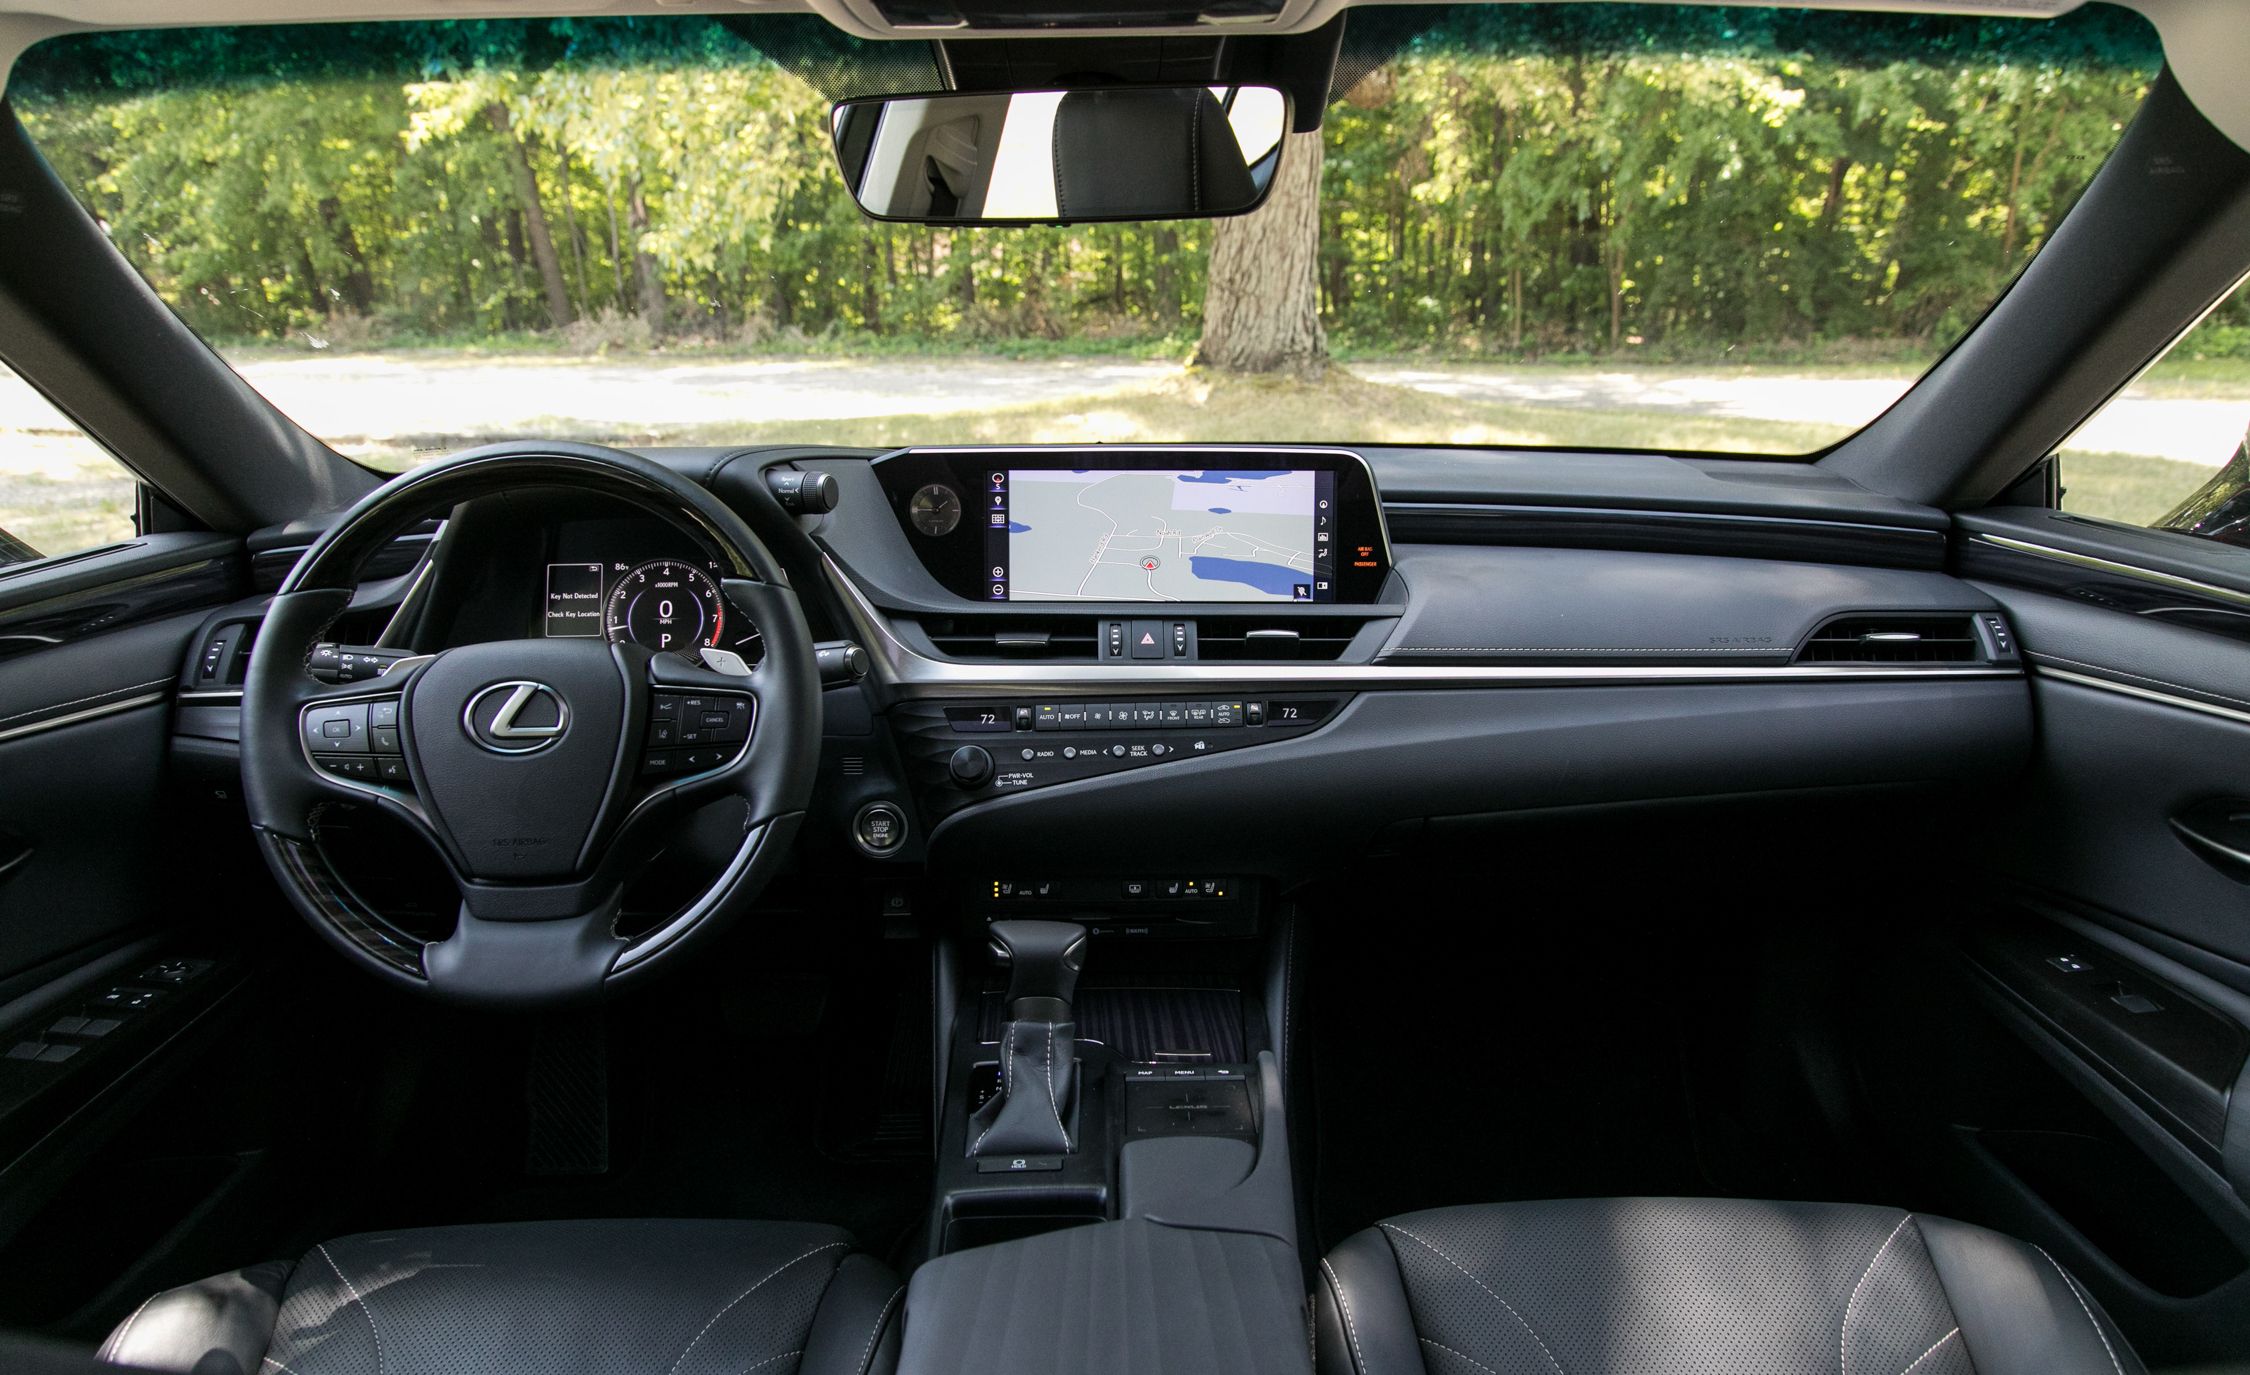 2019 Lexus ES350 Test: An Attractive Luxury Sedan with a Frustrating Flaw